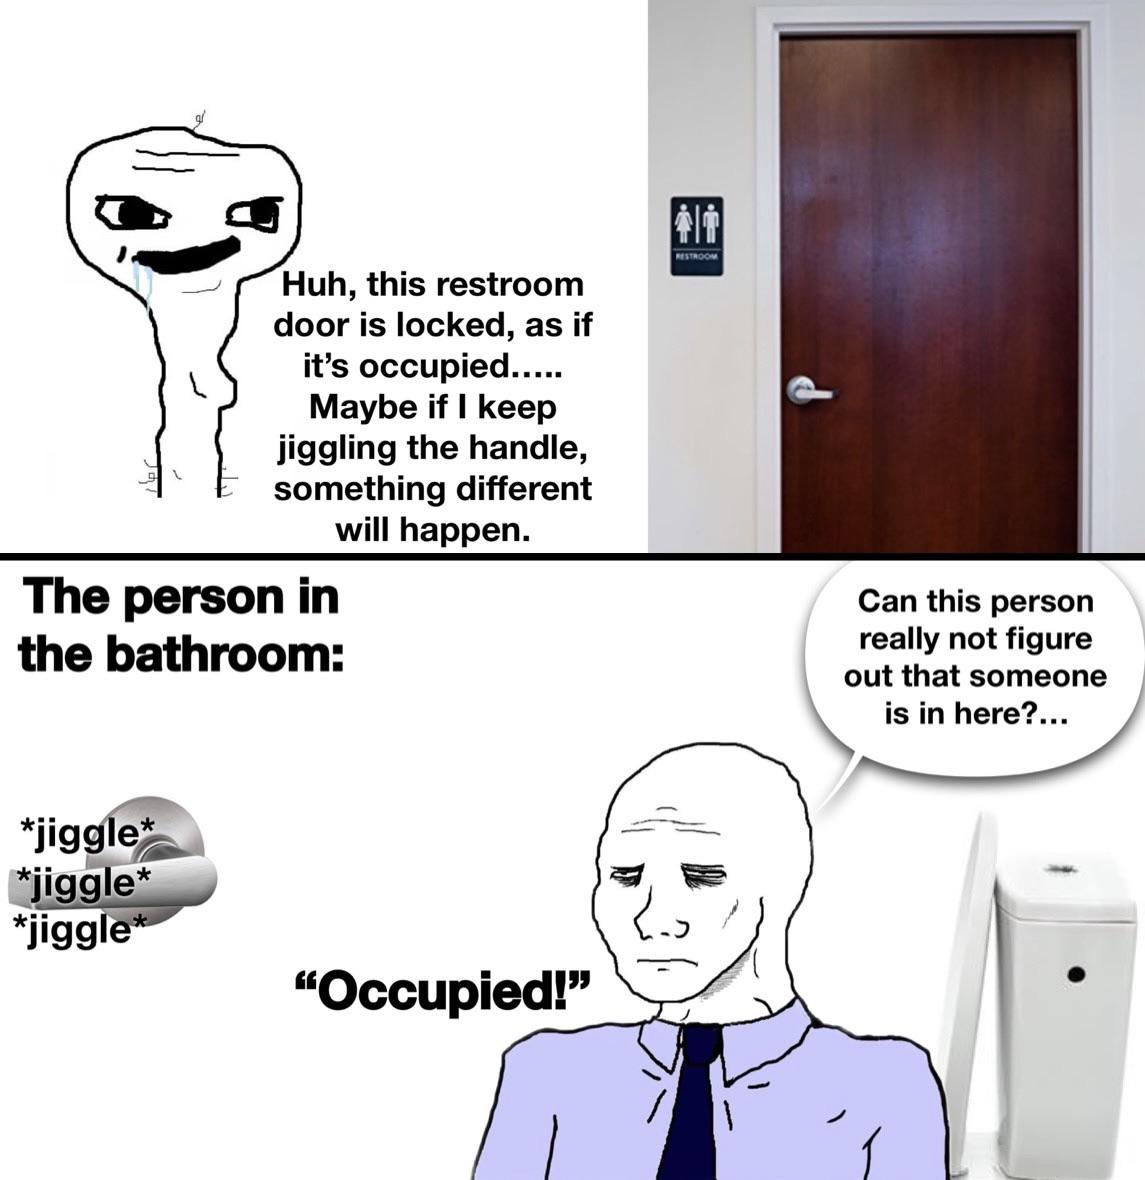 fresh memes - cartoon - Huh, this restroom door is locked, as if it's occupied..... Maybe if I keep jiggling the handle, something different will happen. The person in the bathroom jiggle jiggle jiggle "Occupied!" Restroom Can this person really not figur